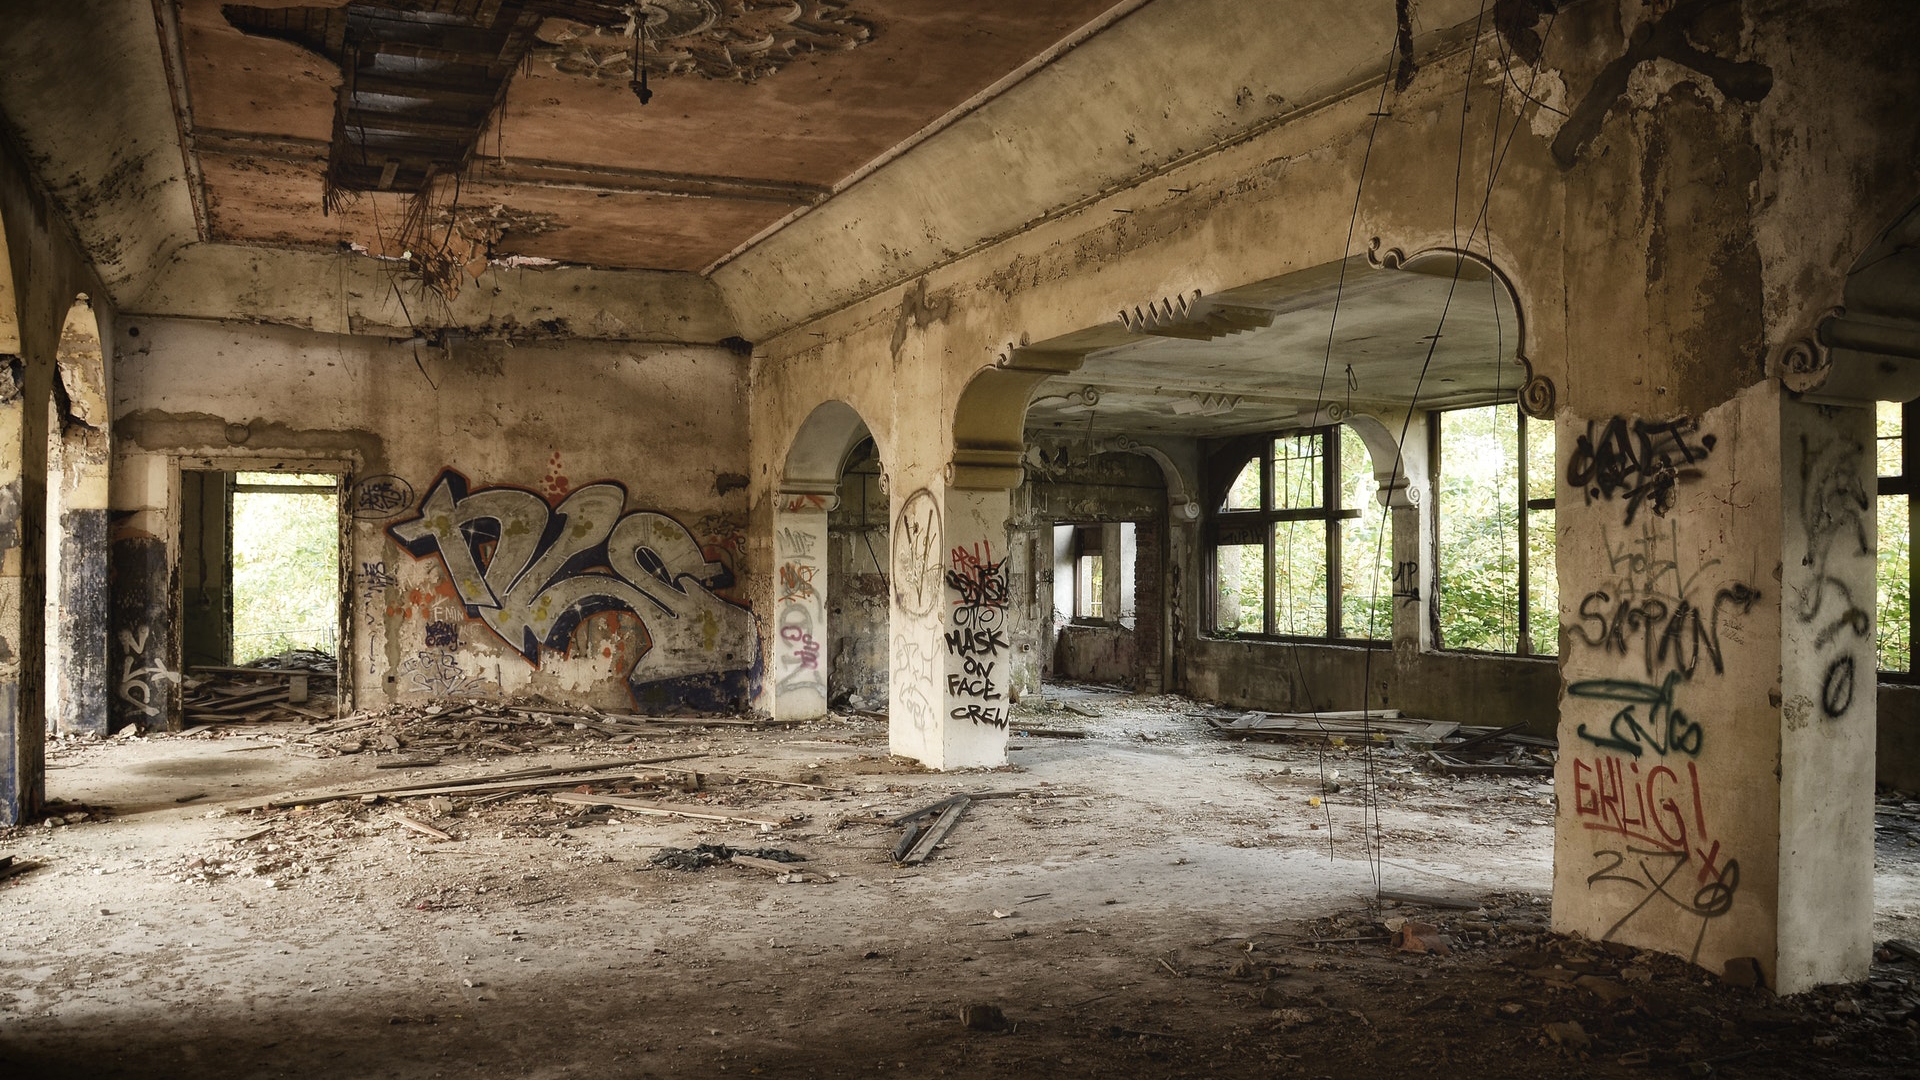 Abandoned building interior. Virtual background to use on Zoom, Microsoft Teams, Skype, Google Meet, WebEx or any other compatible app.